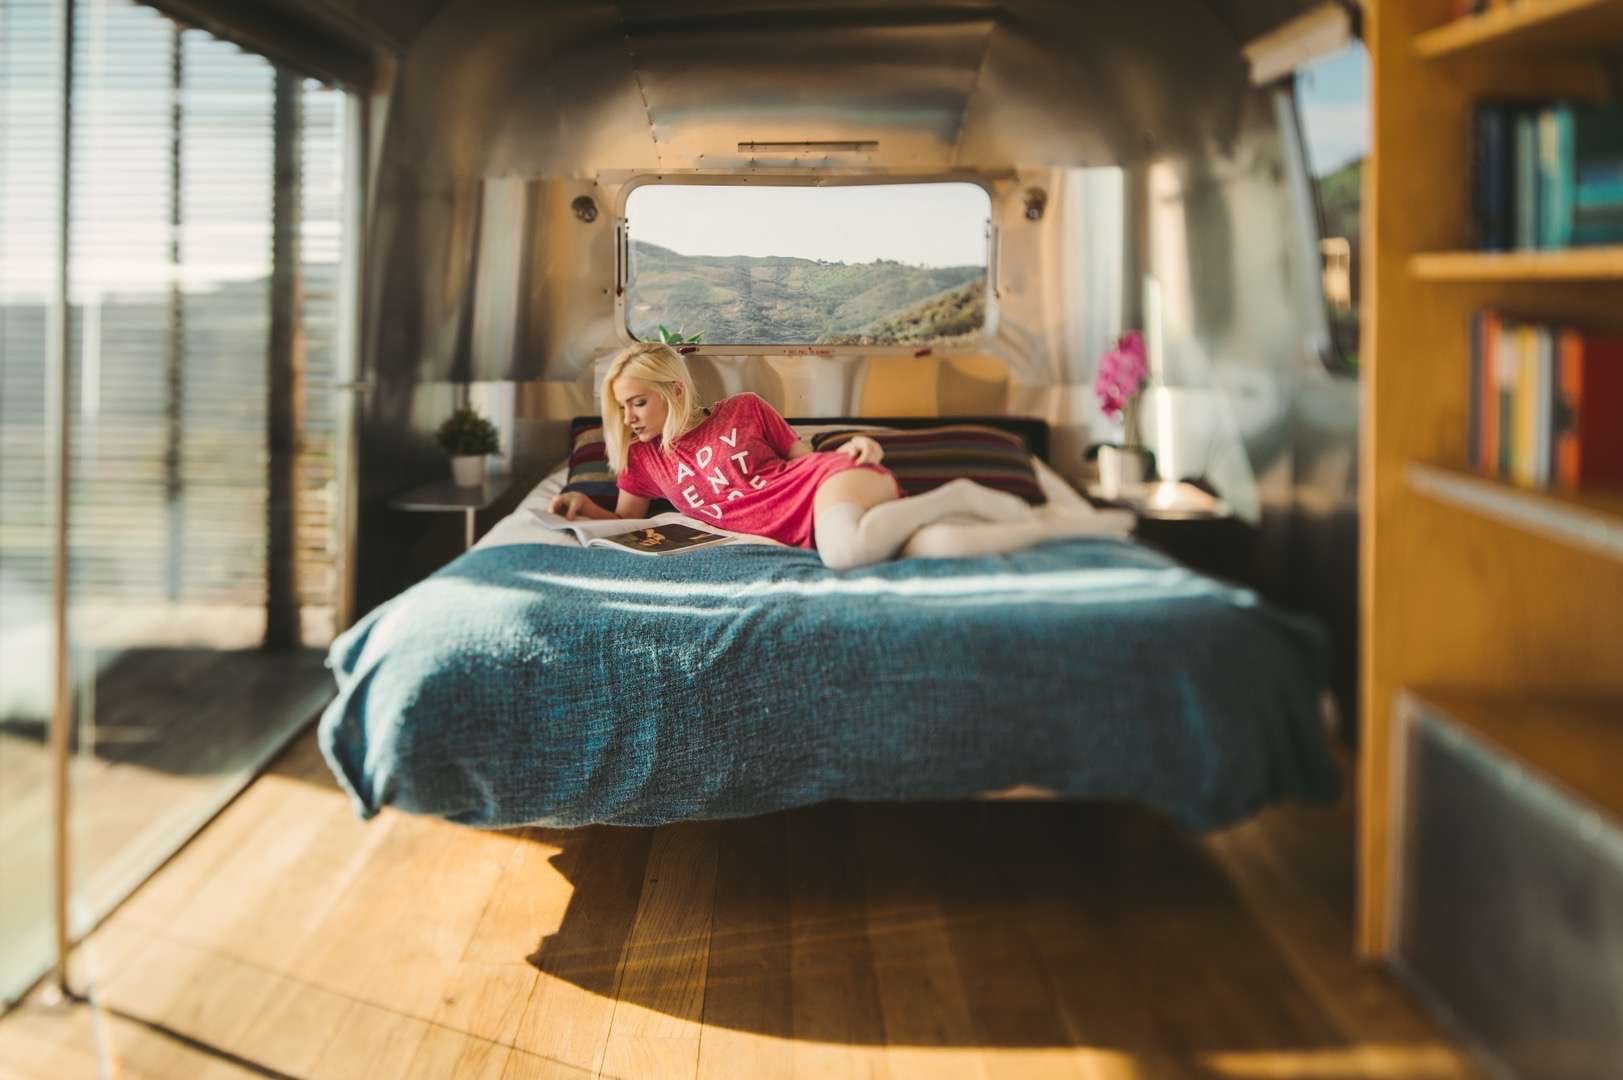 A young woman wearing a red tshirt laying on the bed reading a magazine in a RV.